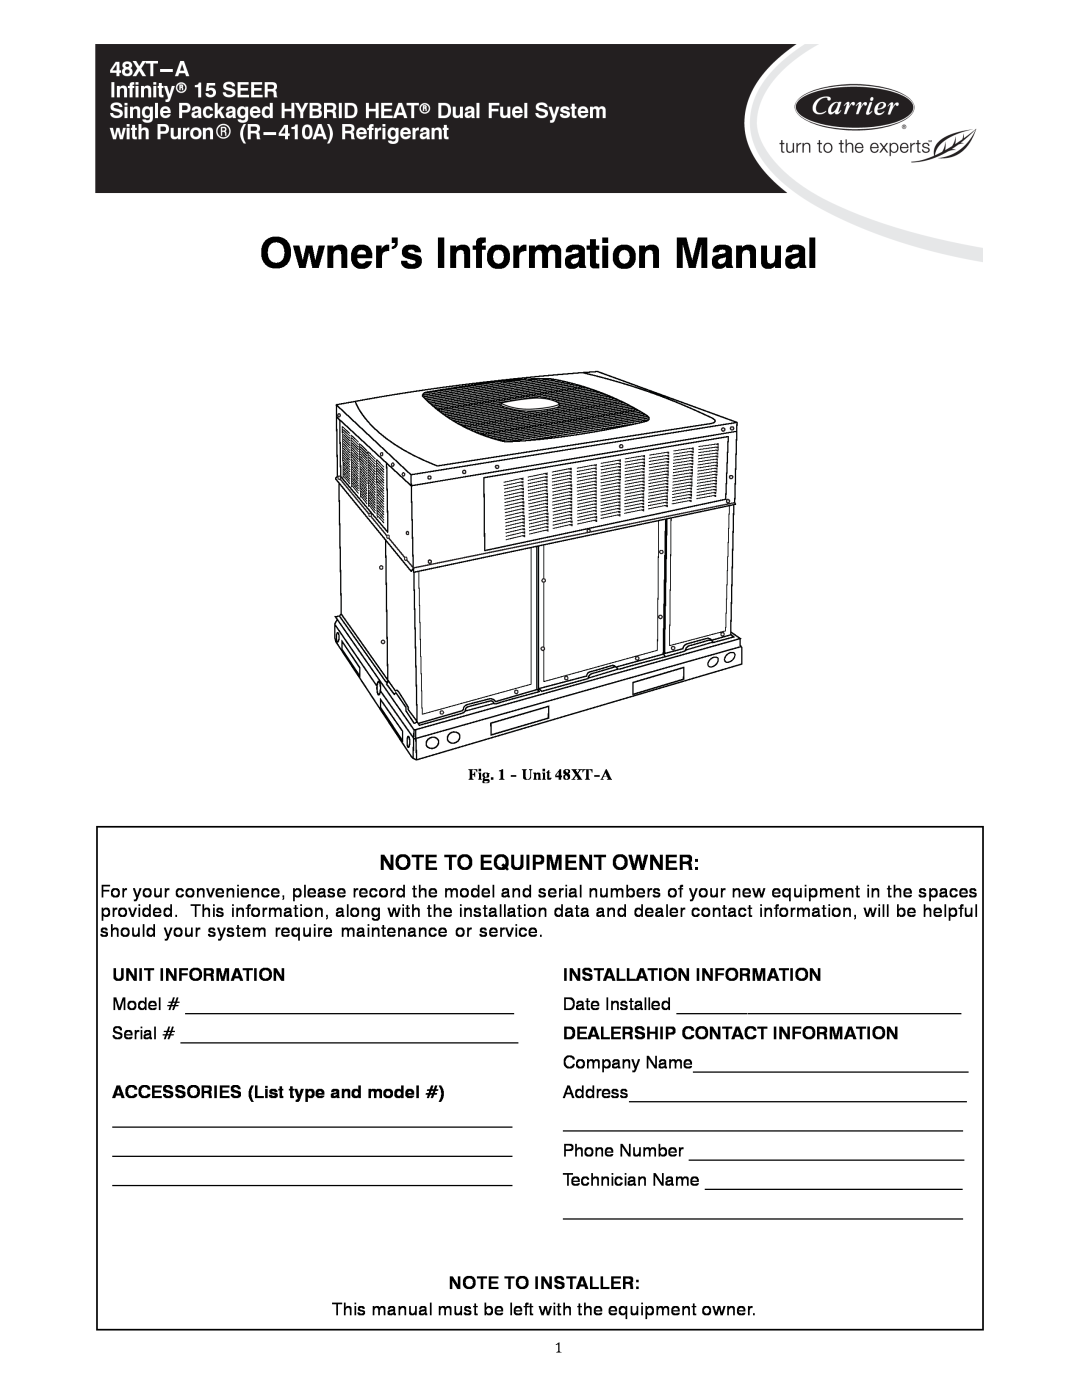 Carrier 48XT-A manual Owner’s Information Manual, 48XT---A Infinityr 15 SEER, Note To Equipment Owner, Unit Information 